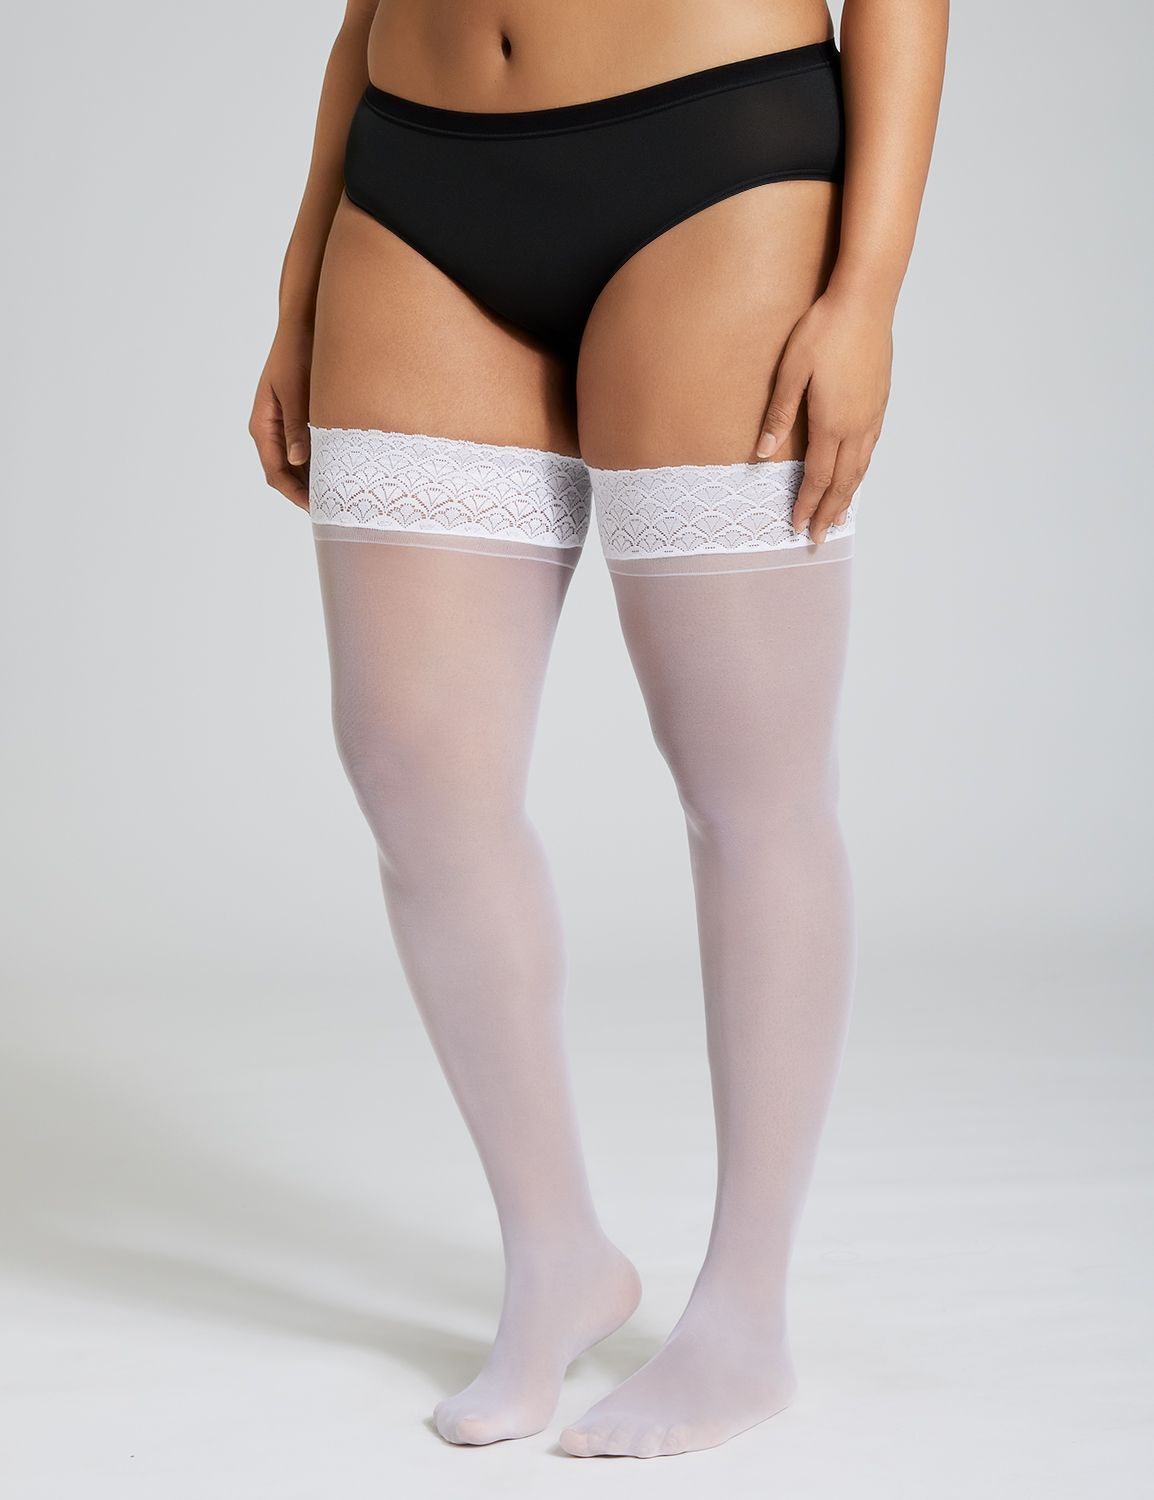 sexy BE WICKED sheer HIGH waist SUPPORT spandex PANTYHOSE nylons STOCKINGS  hose